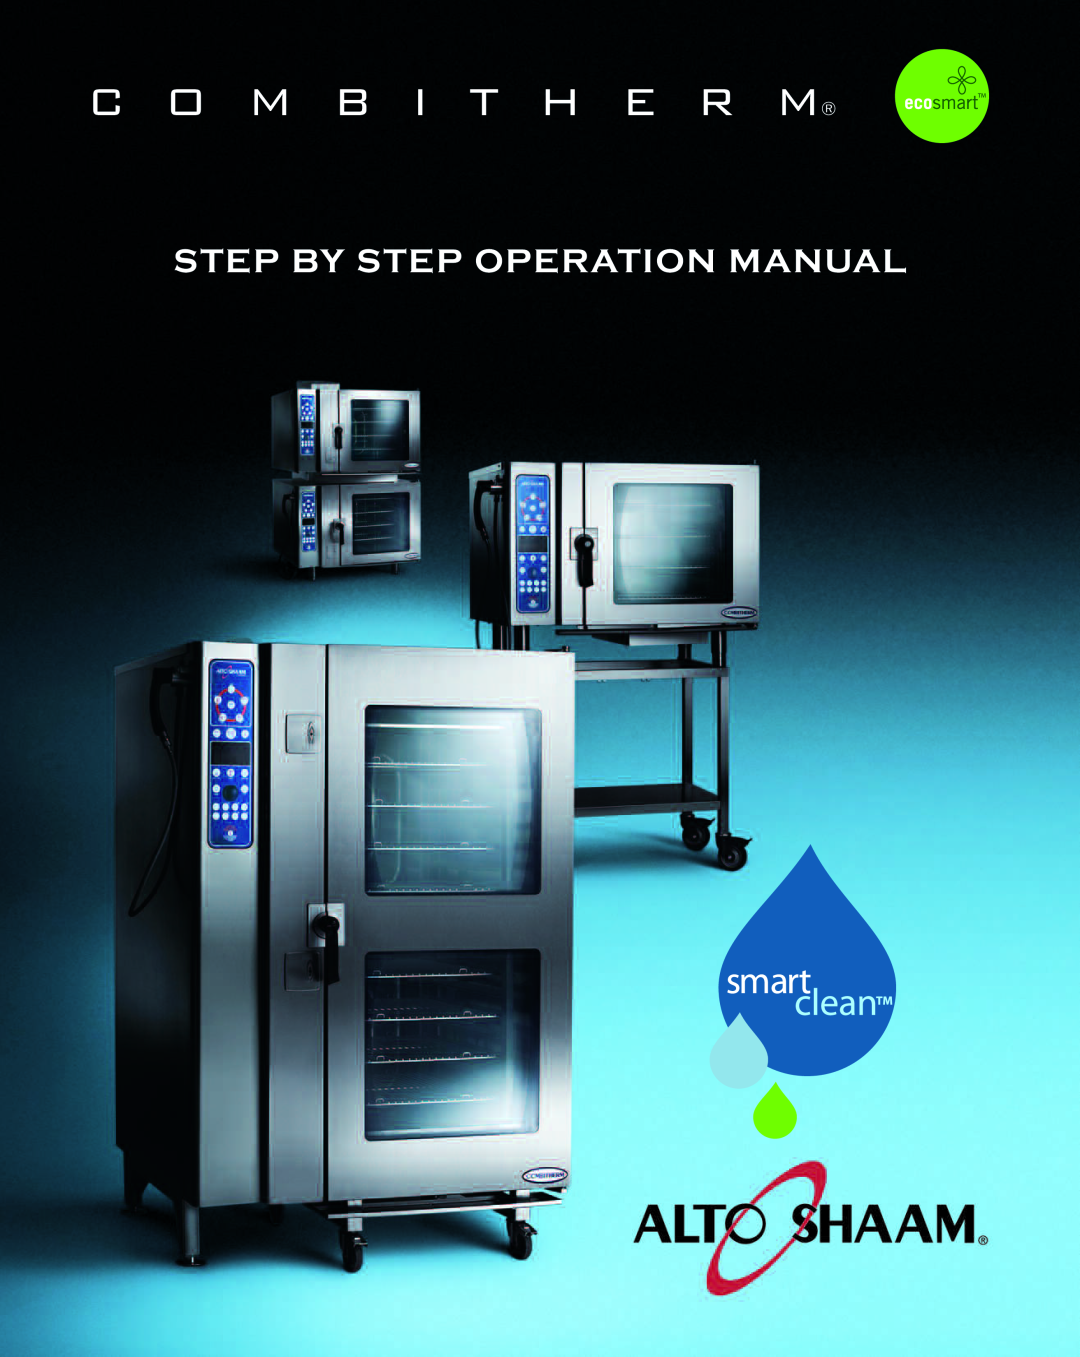 Alto-Shaam 1020, 1218 operation manual Combitherm, Step By Step Operation Manual 